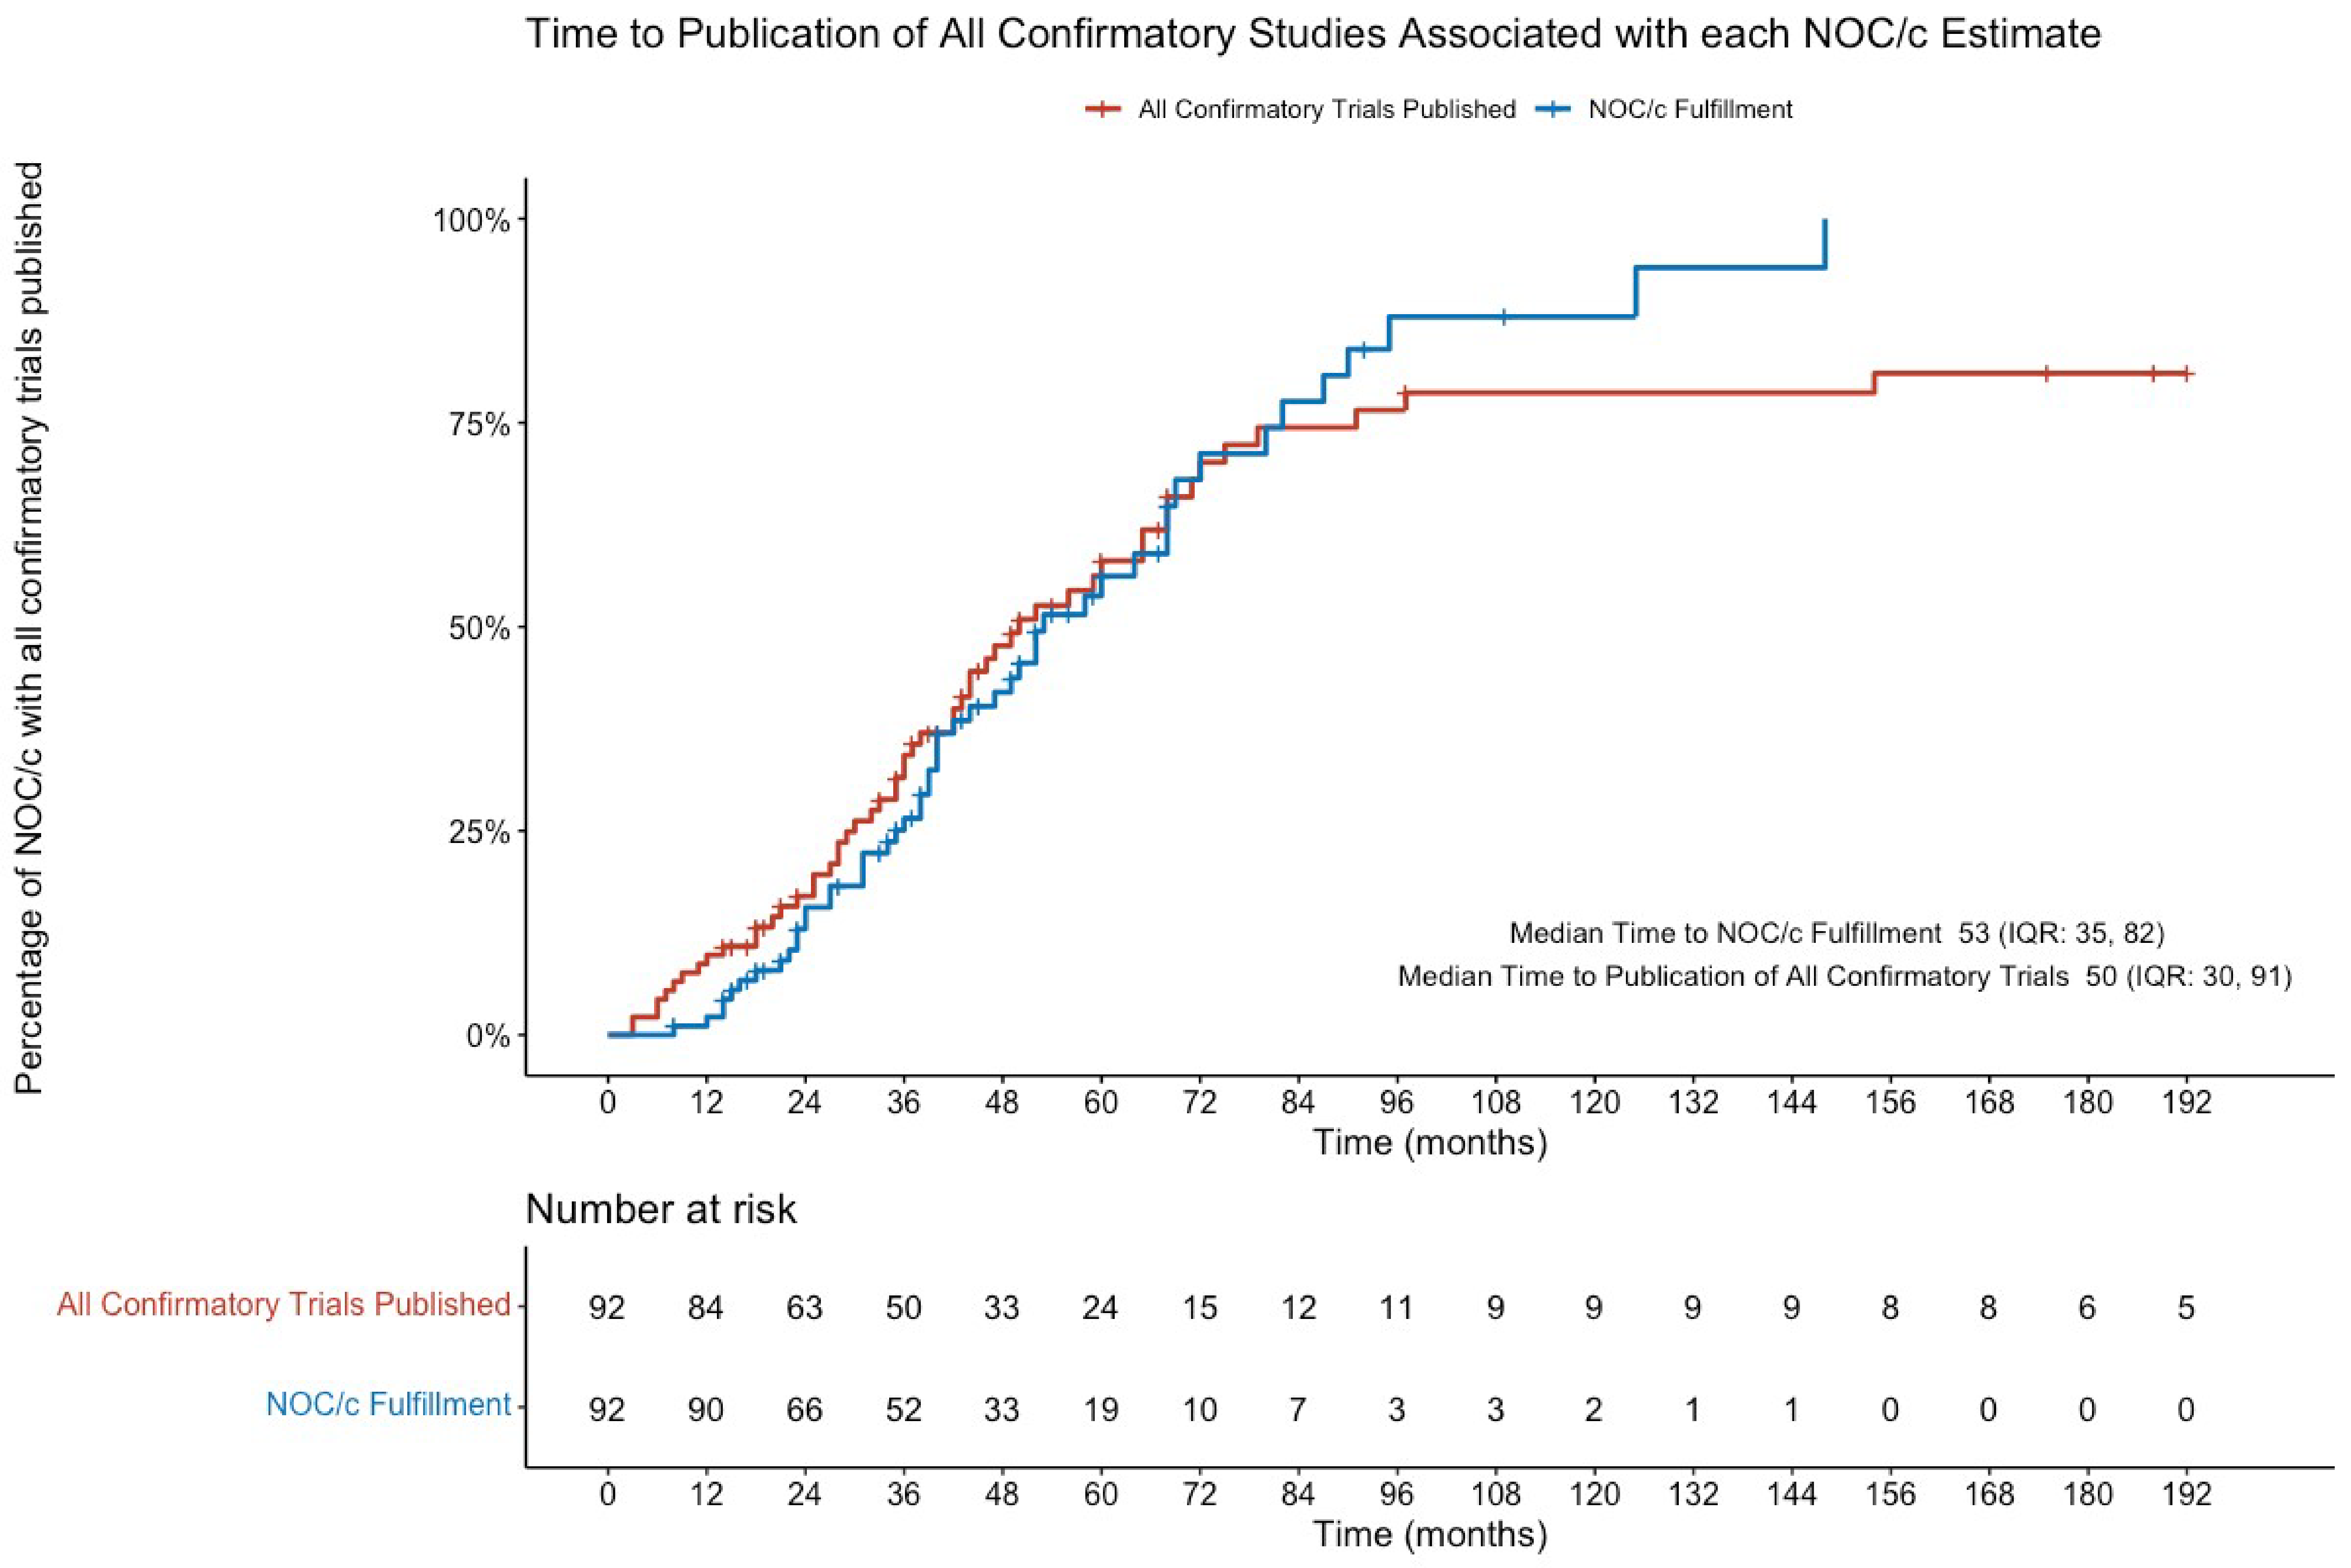 Publication of all confirmatory trials associated with an NOC/c occurred a median of 50 months after NOC/c issuance. Compared to the median time to NOC/c fulfillment at 53 months, the results of all confirmatory studies used to evaluate whether conditions have been fulfilled were published a median of 8 months before the NOC/c was marked as fulfilled.